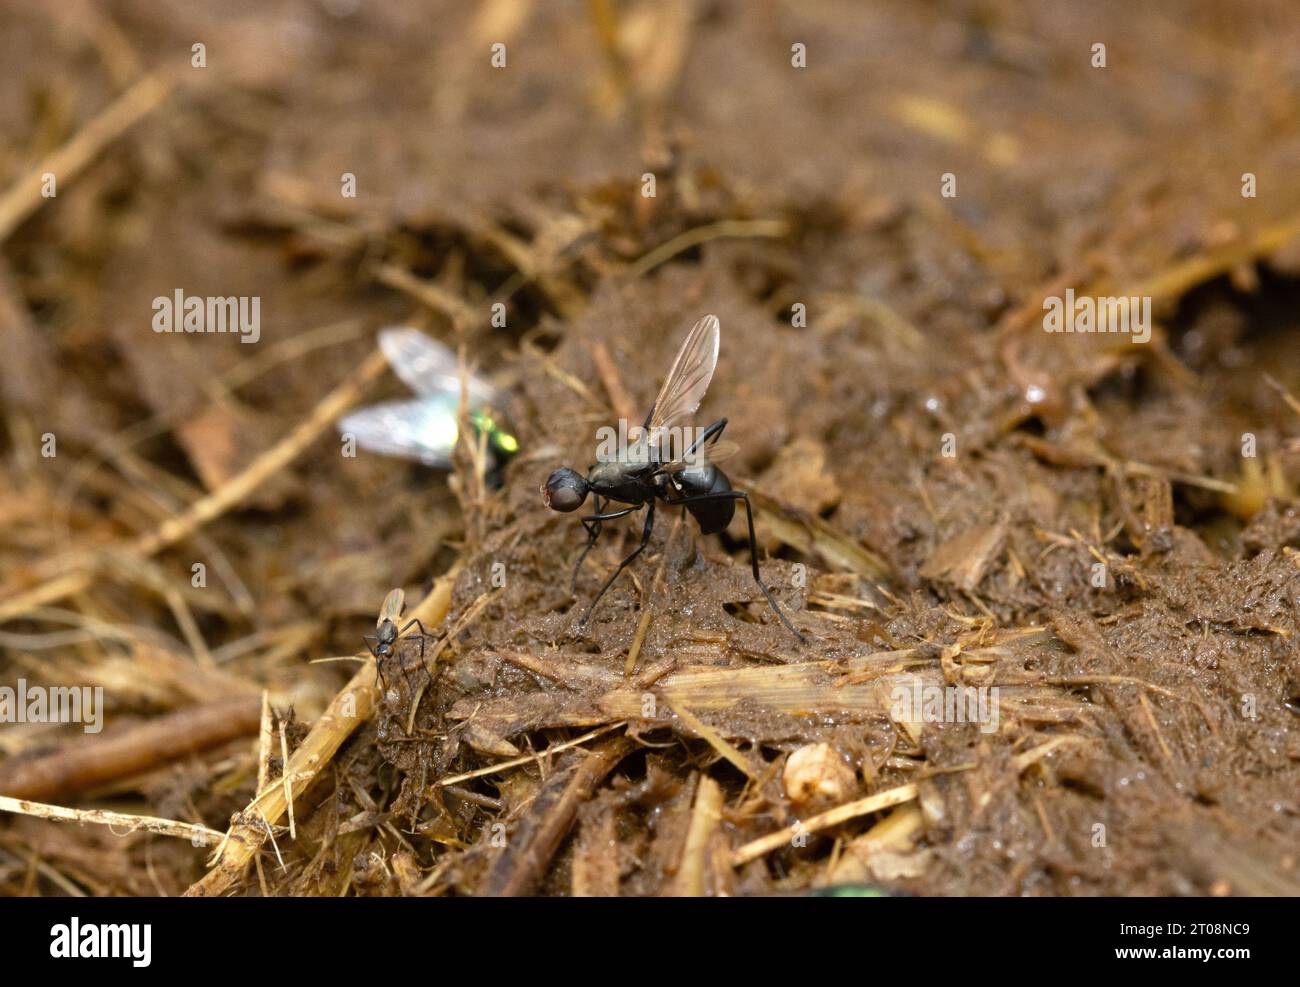 Groups of Long-legged Fly are often seen on fresh dung. They are ant mimics and also called Black Scavenger Flies. They constantly wave their wings. Stock Photo